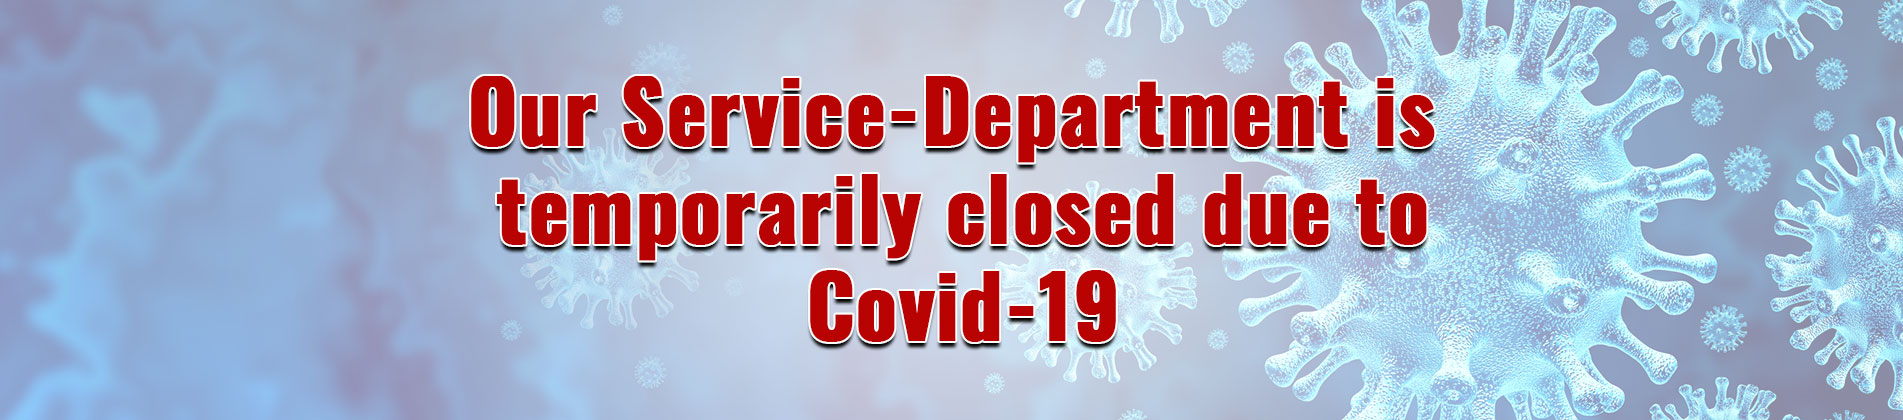 Service-Department is closed do to Covid-19